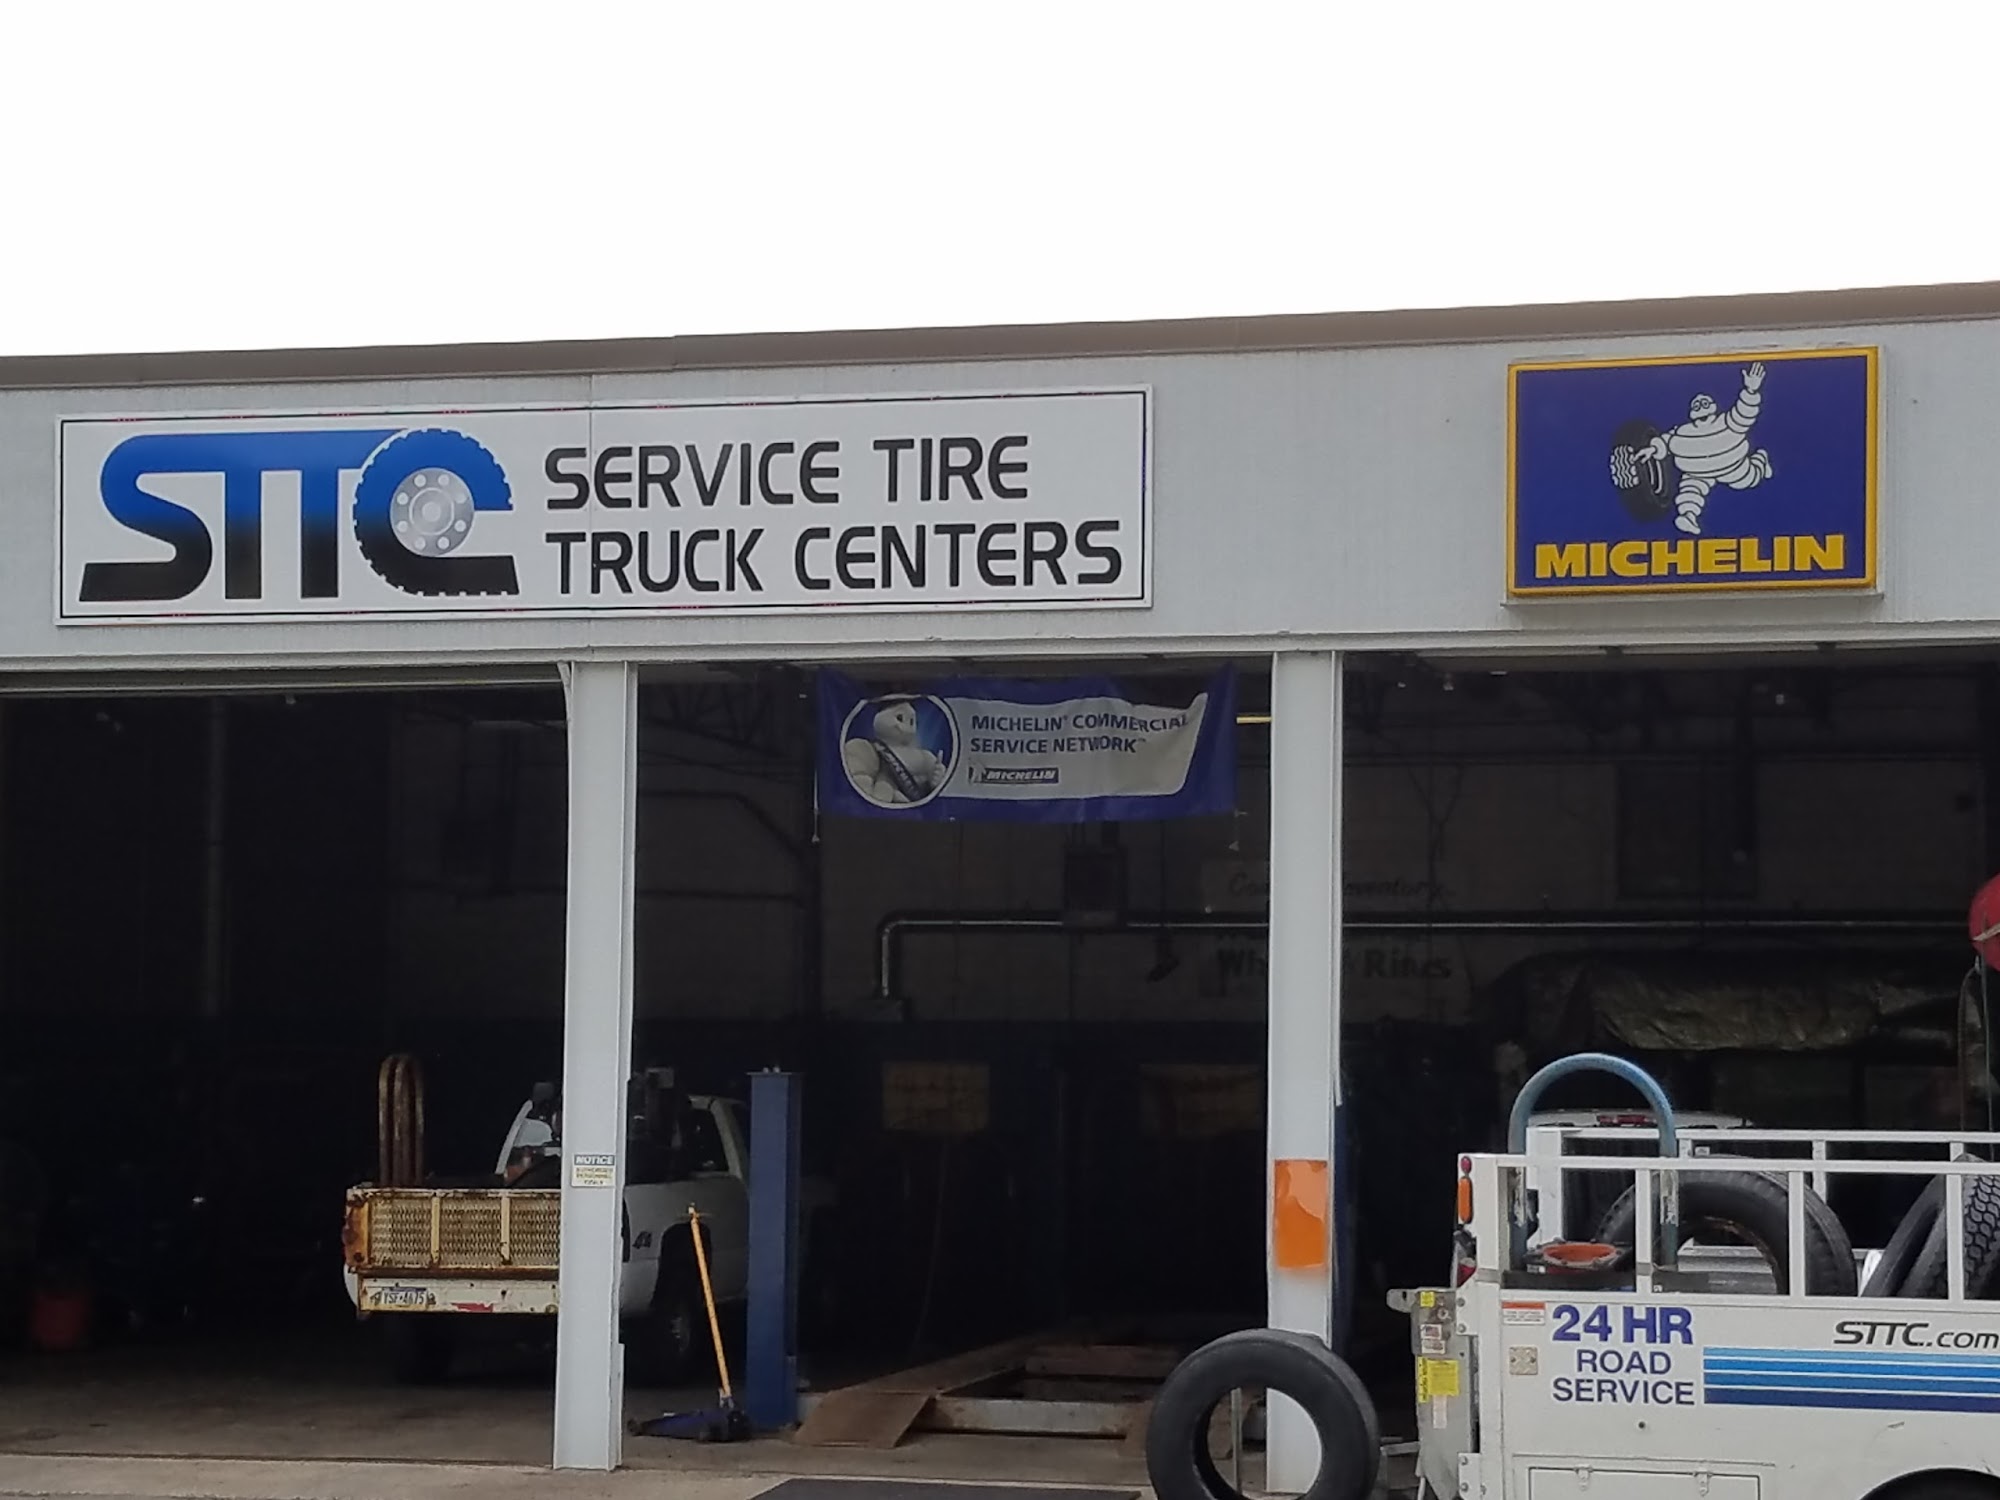 Service Tire Truck Center - Commercial Truck Tires at Auburn, MA